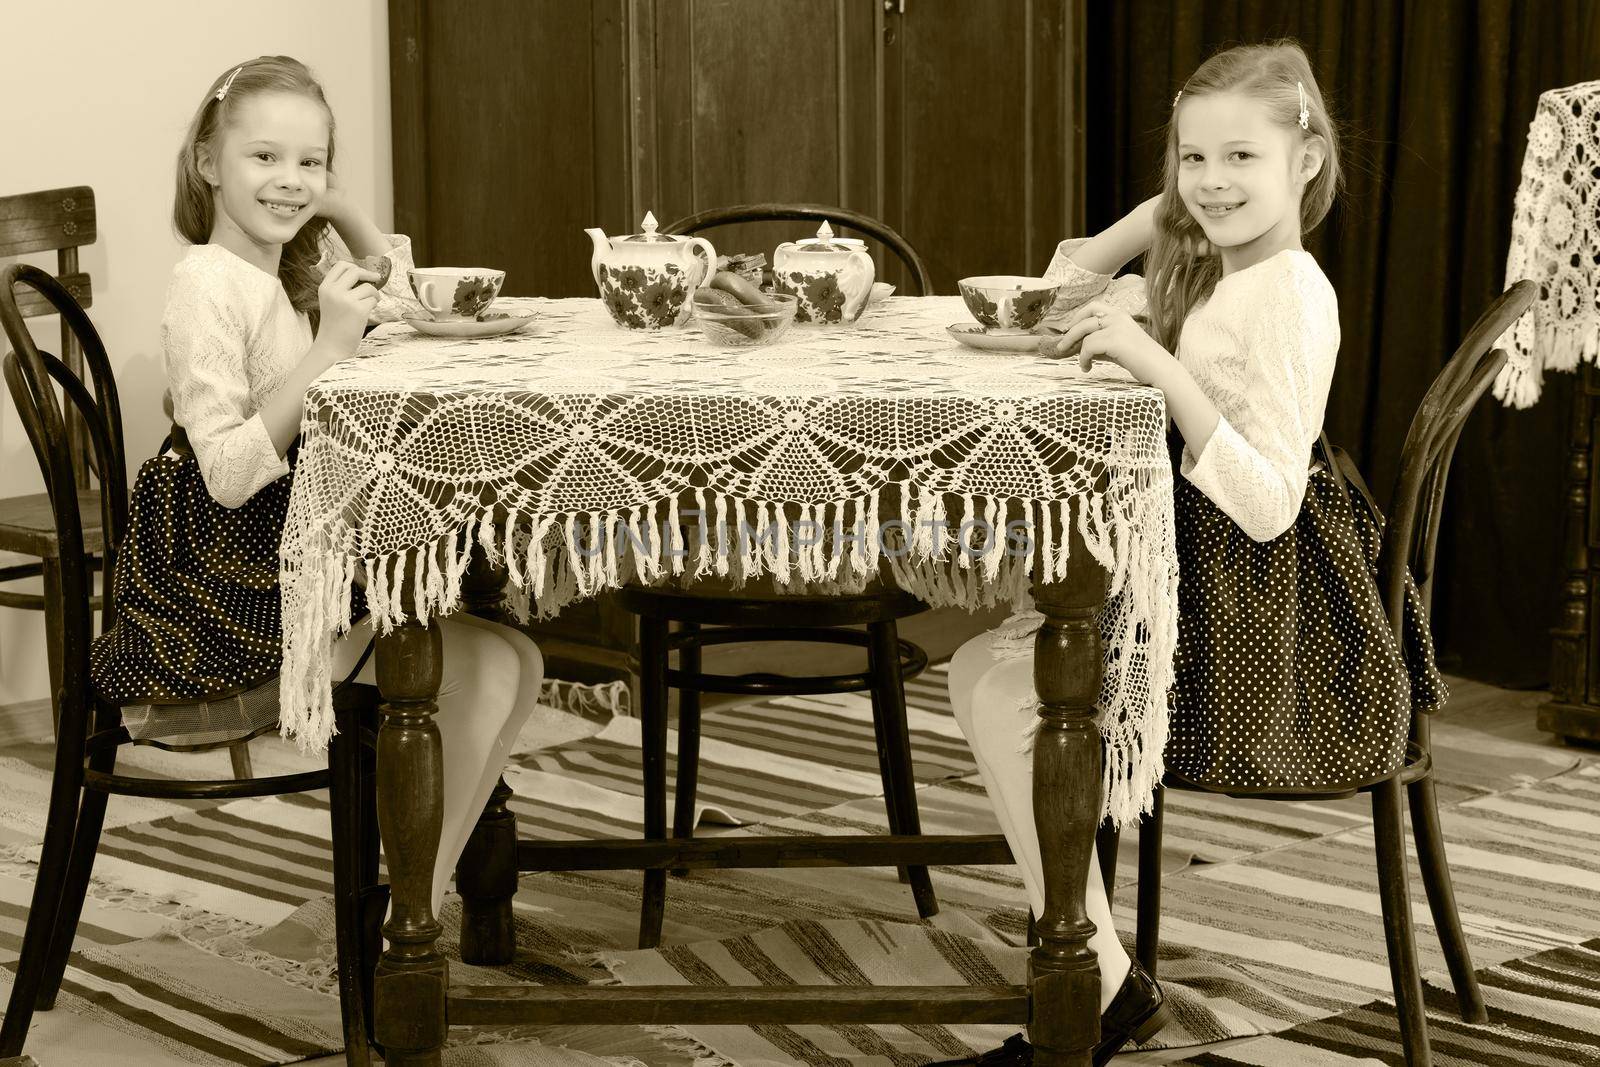 Girls Twins drinking tea at an antique table with a lace tablecl by kolesnikov_studio